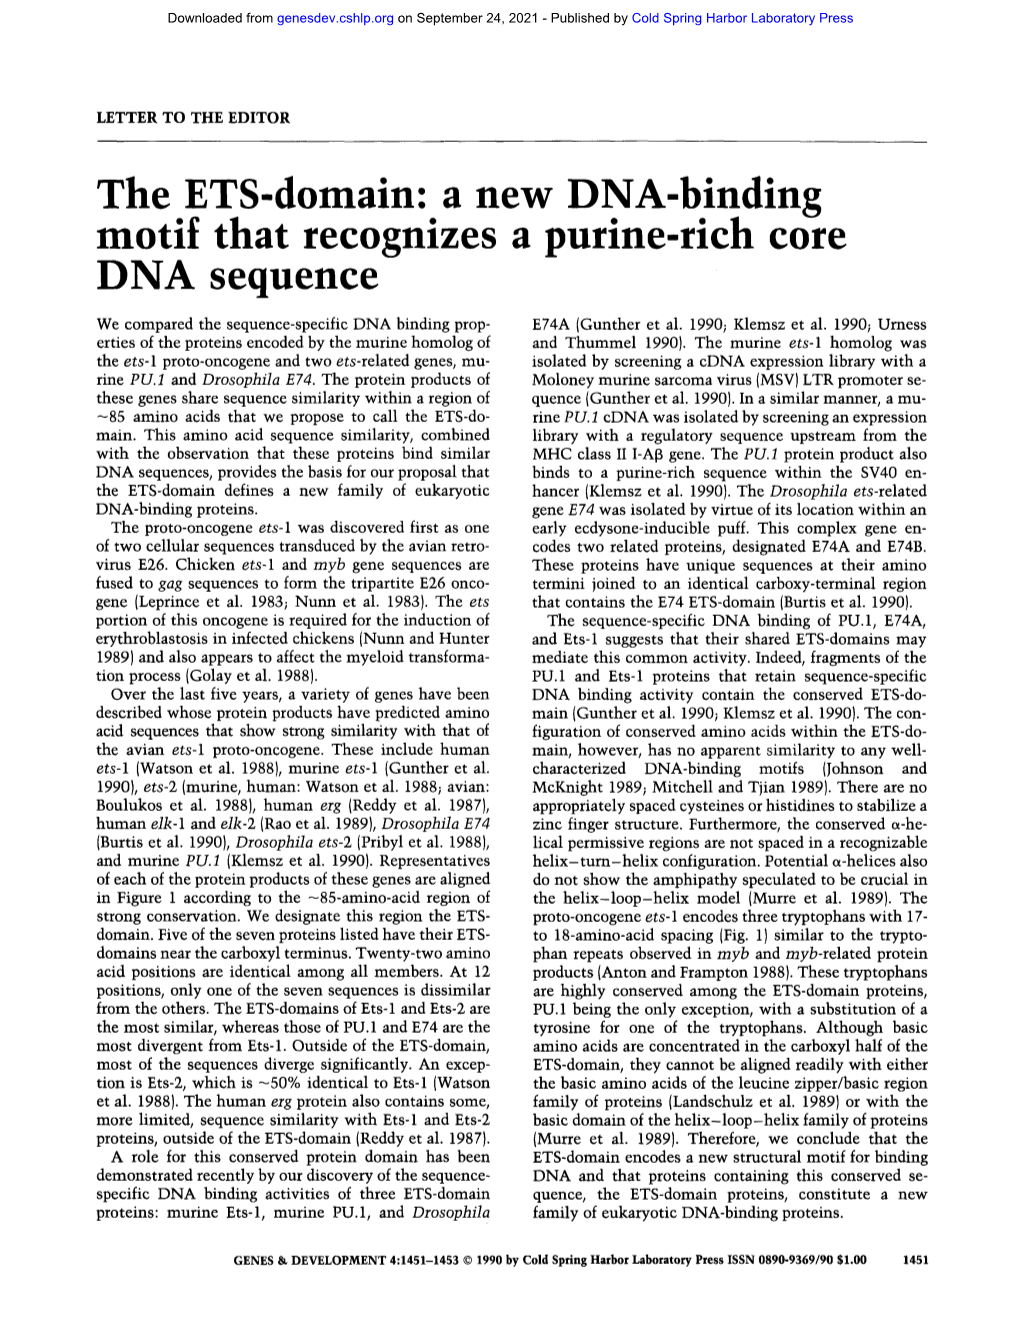 The ETS-Domaln: a New DNA-Bmdmg Motif That Recognizes a Purine-Rich Core DNA Sequence